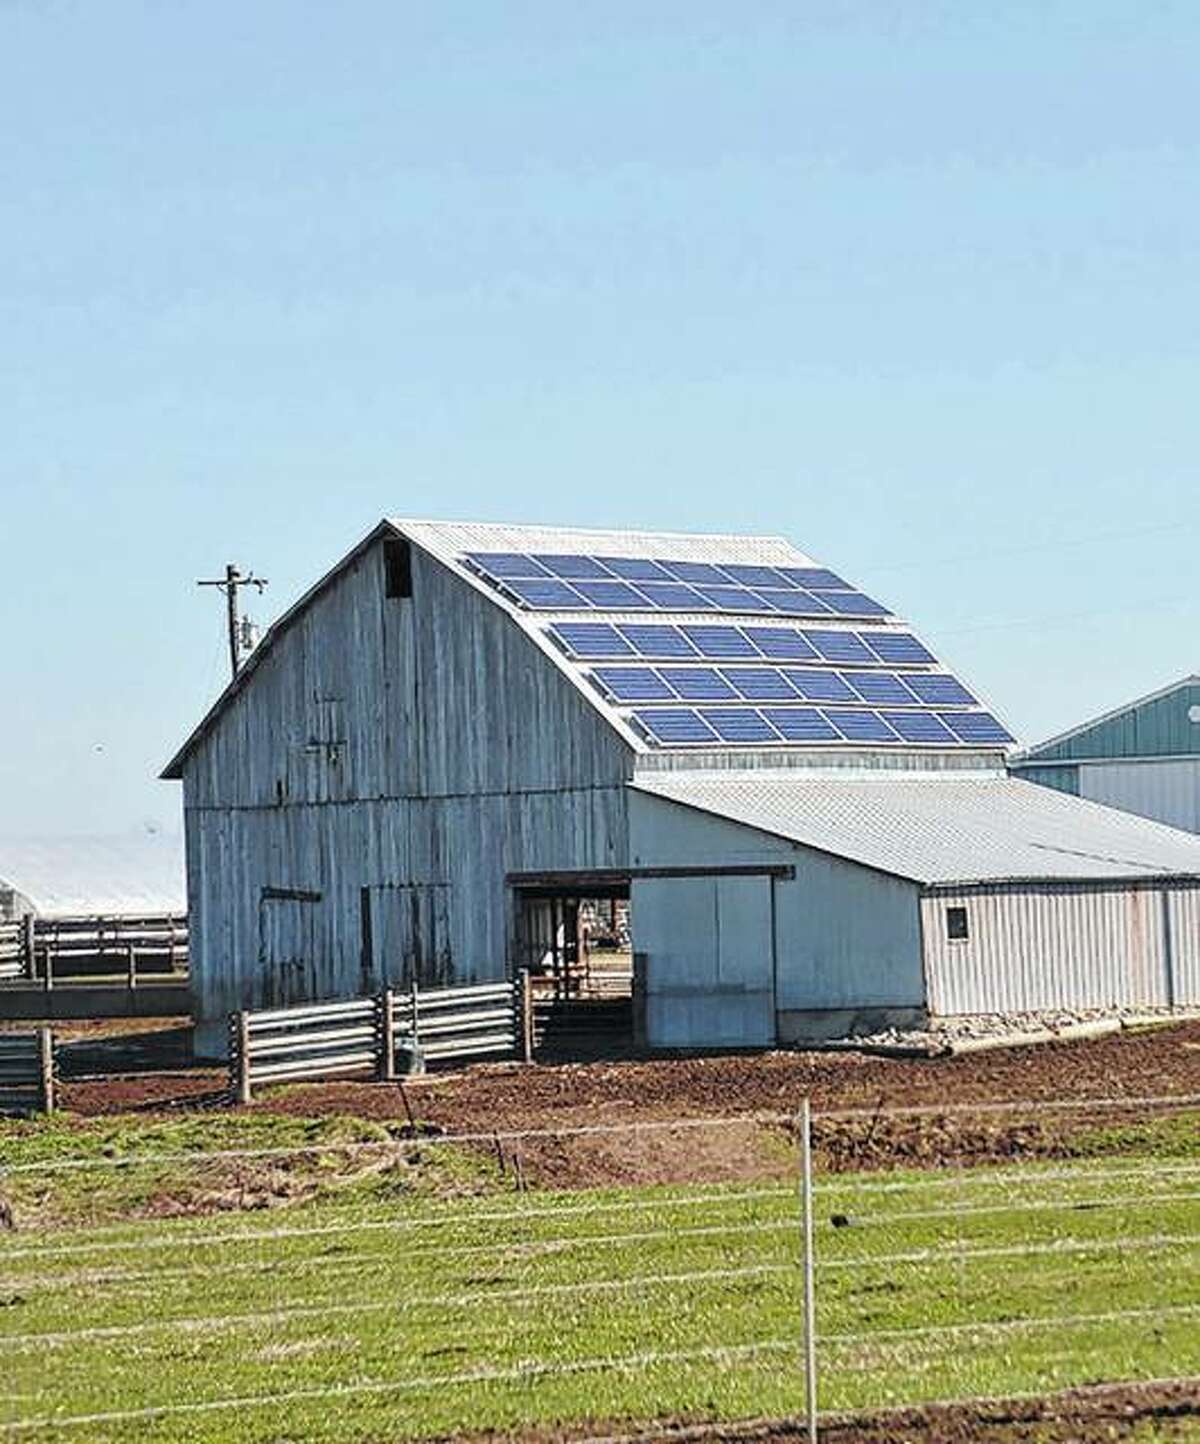 A solar array can be seen on a barn at Rhodes Farm on Illinois Route 108 in Macoupin County. It faces south, collecting sunlight and converting it into usable energy for the farm.